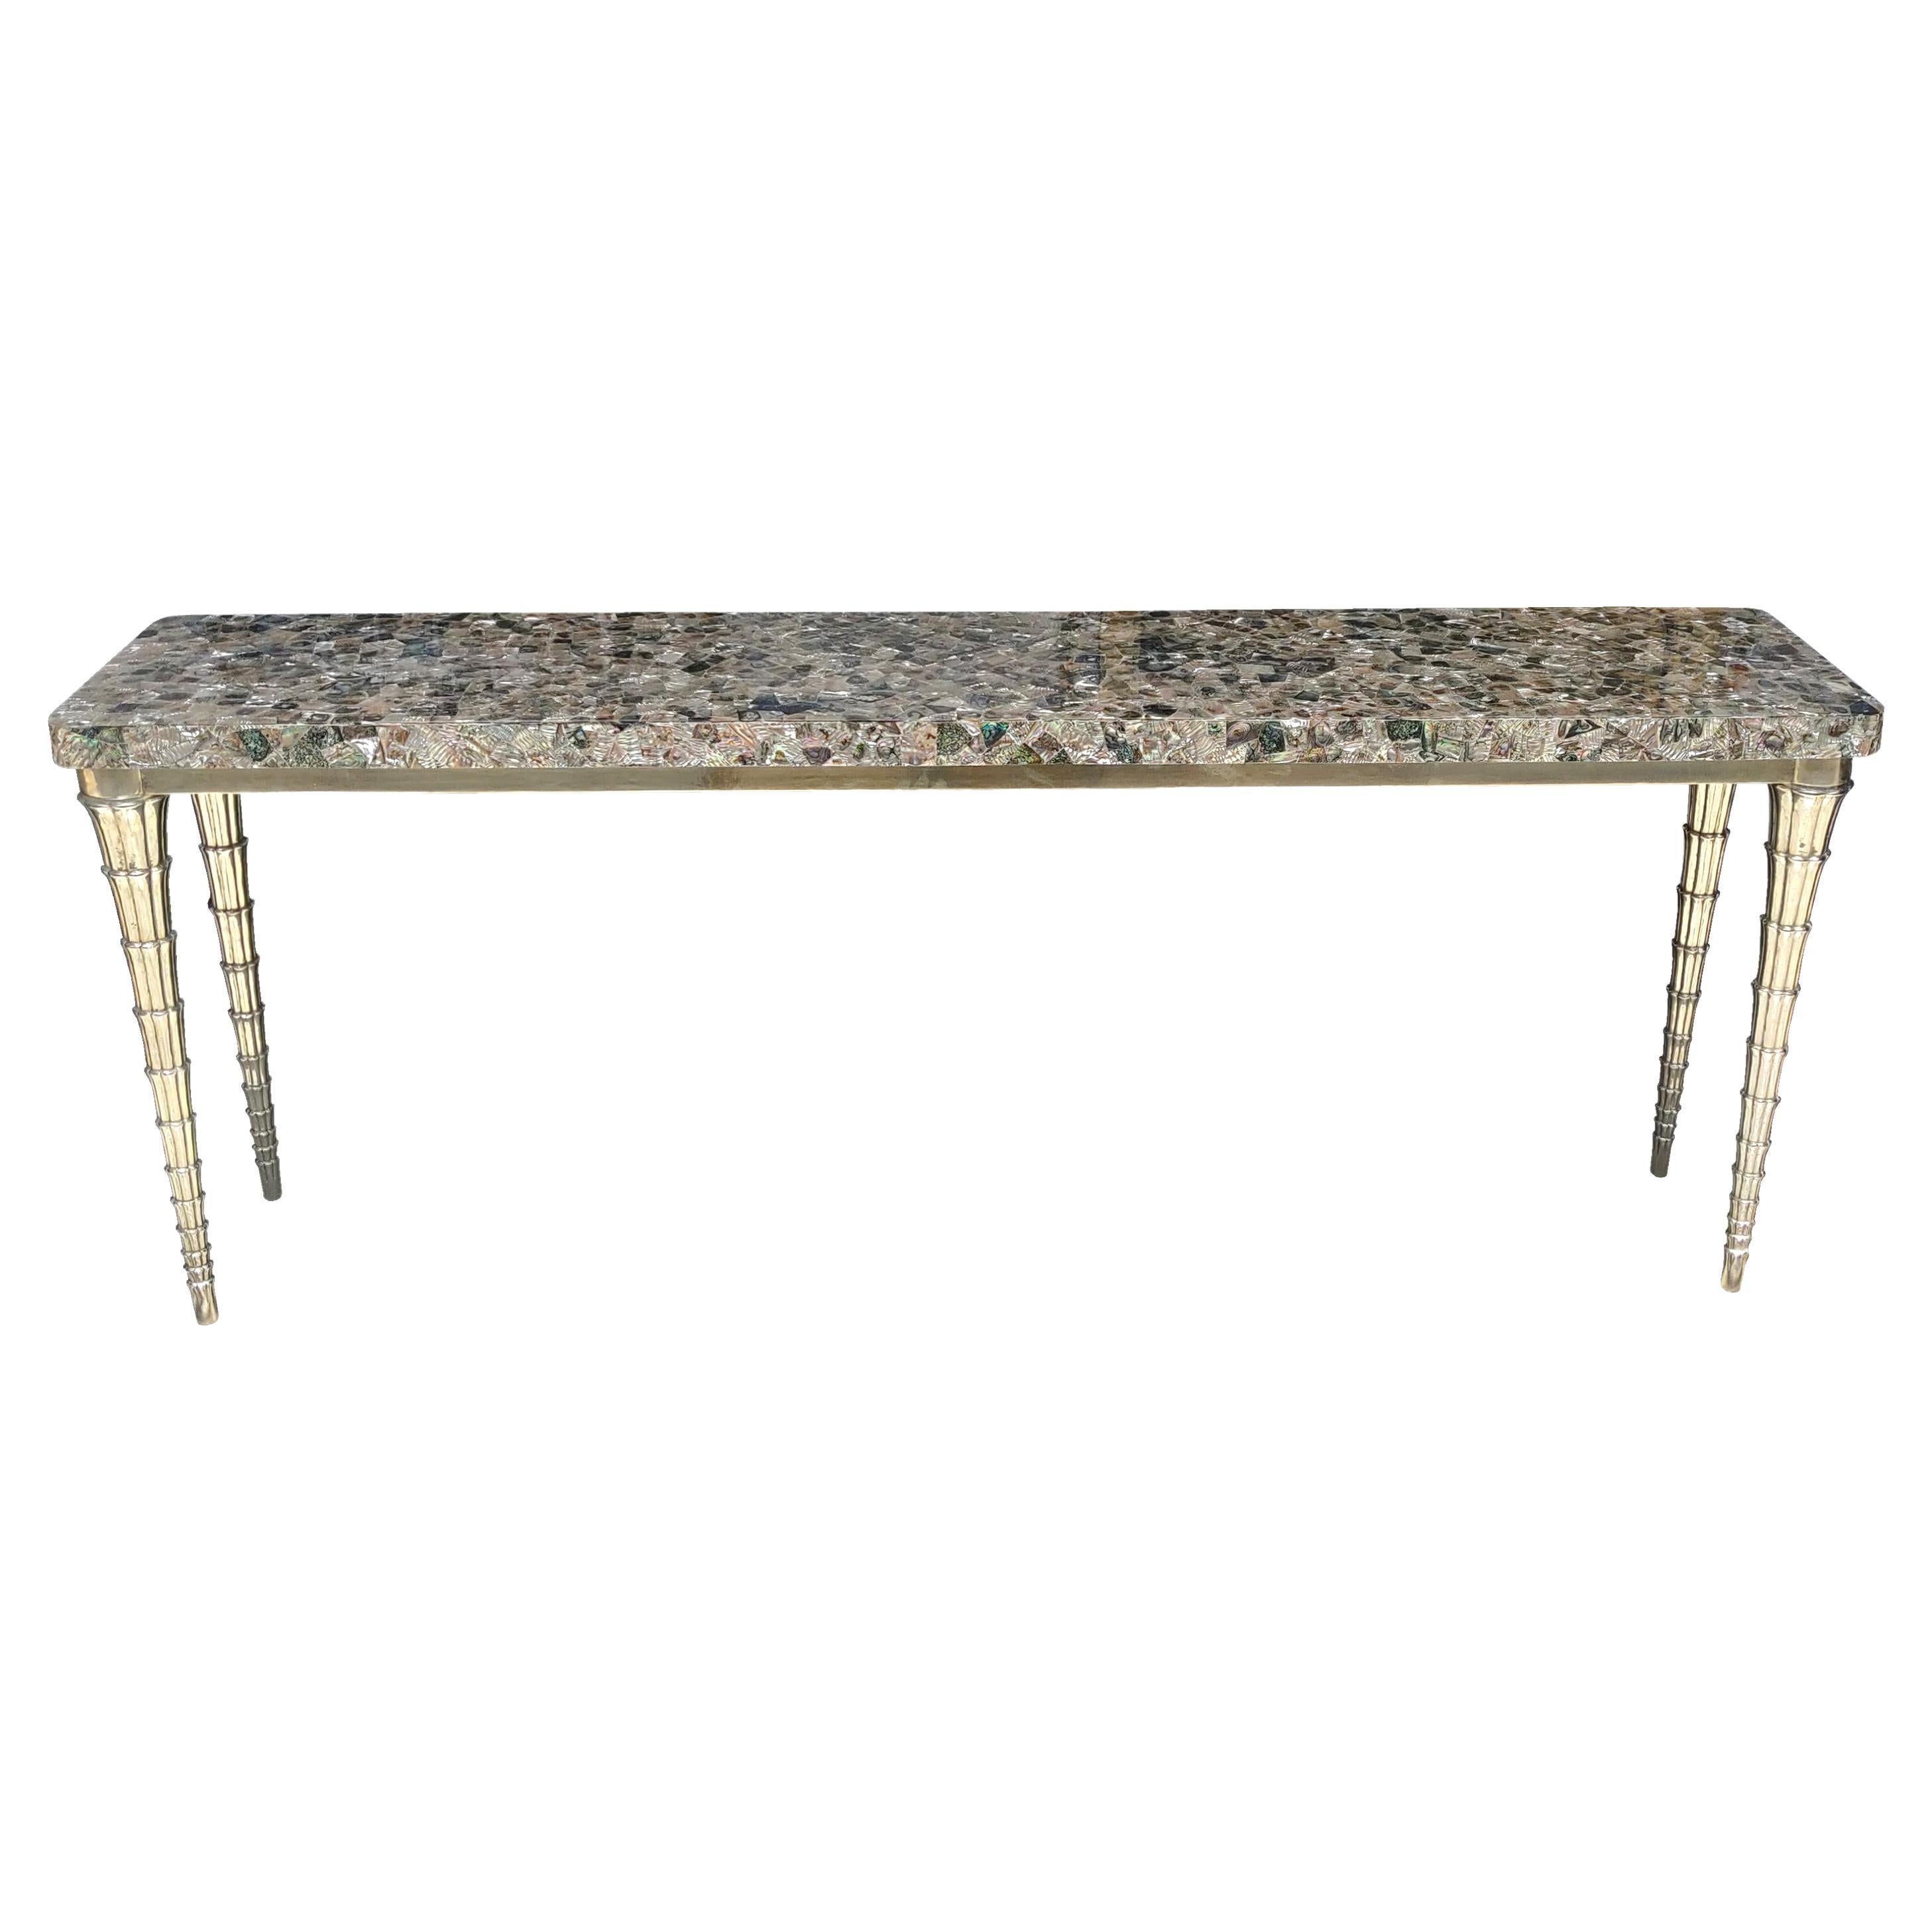 Pink Abalone and White Bronze Clad Cornet Table Handcrafted in India